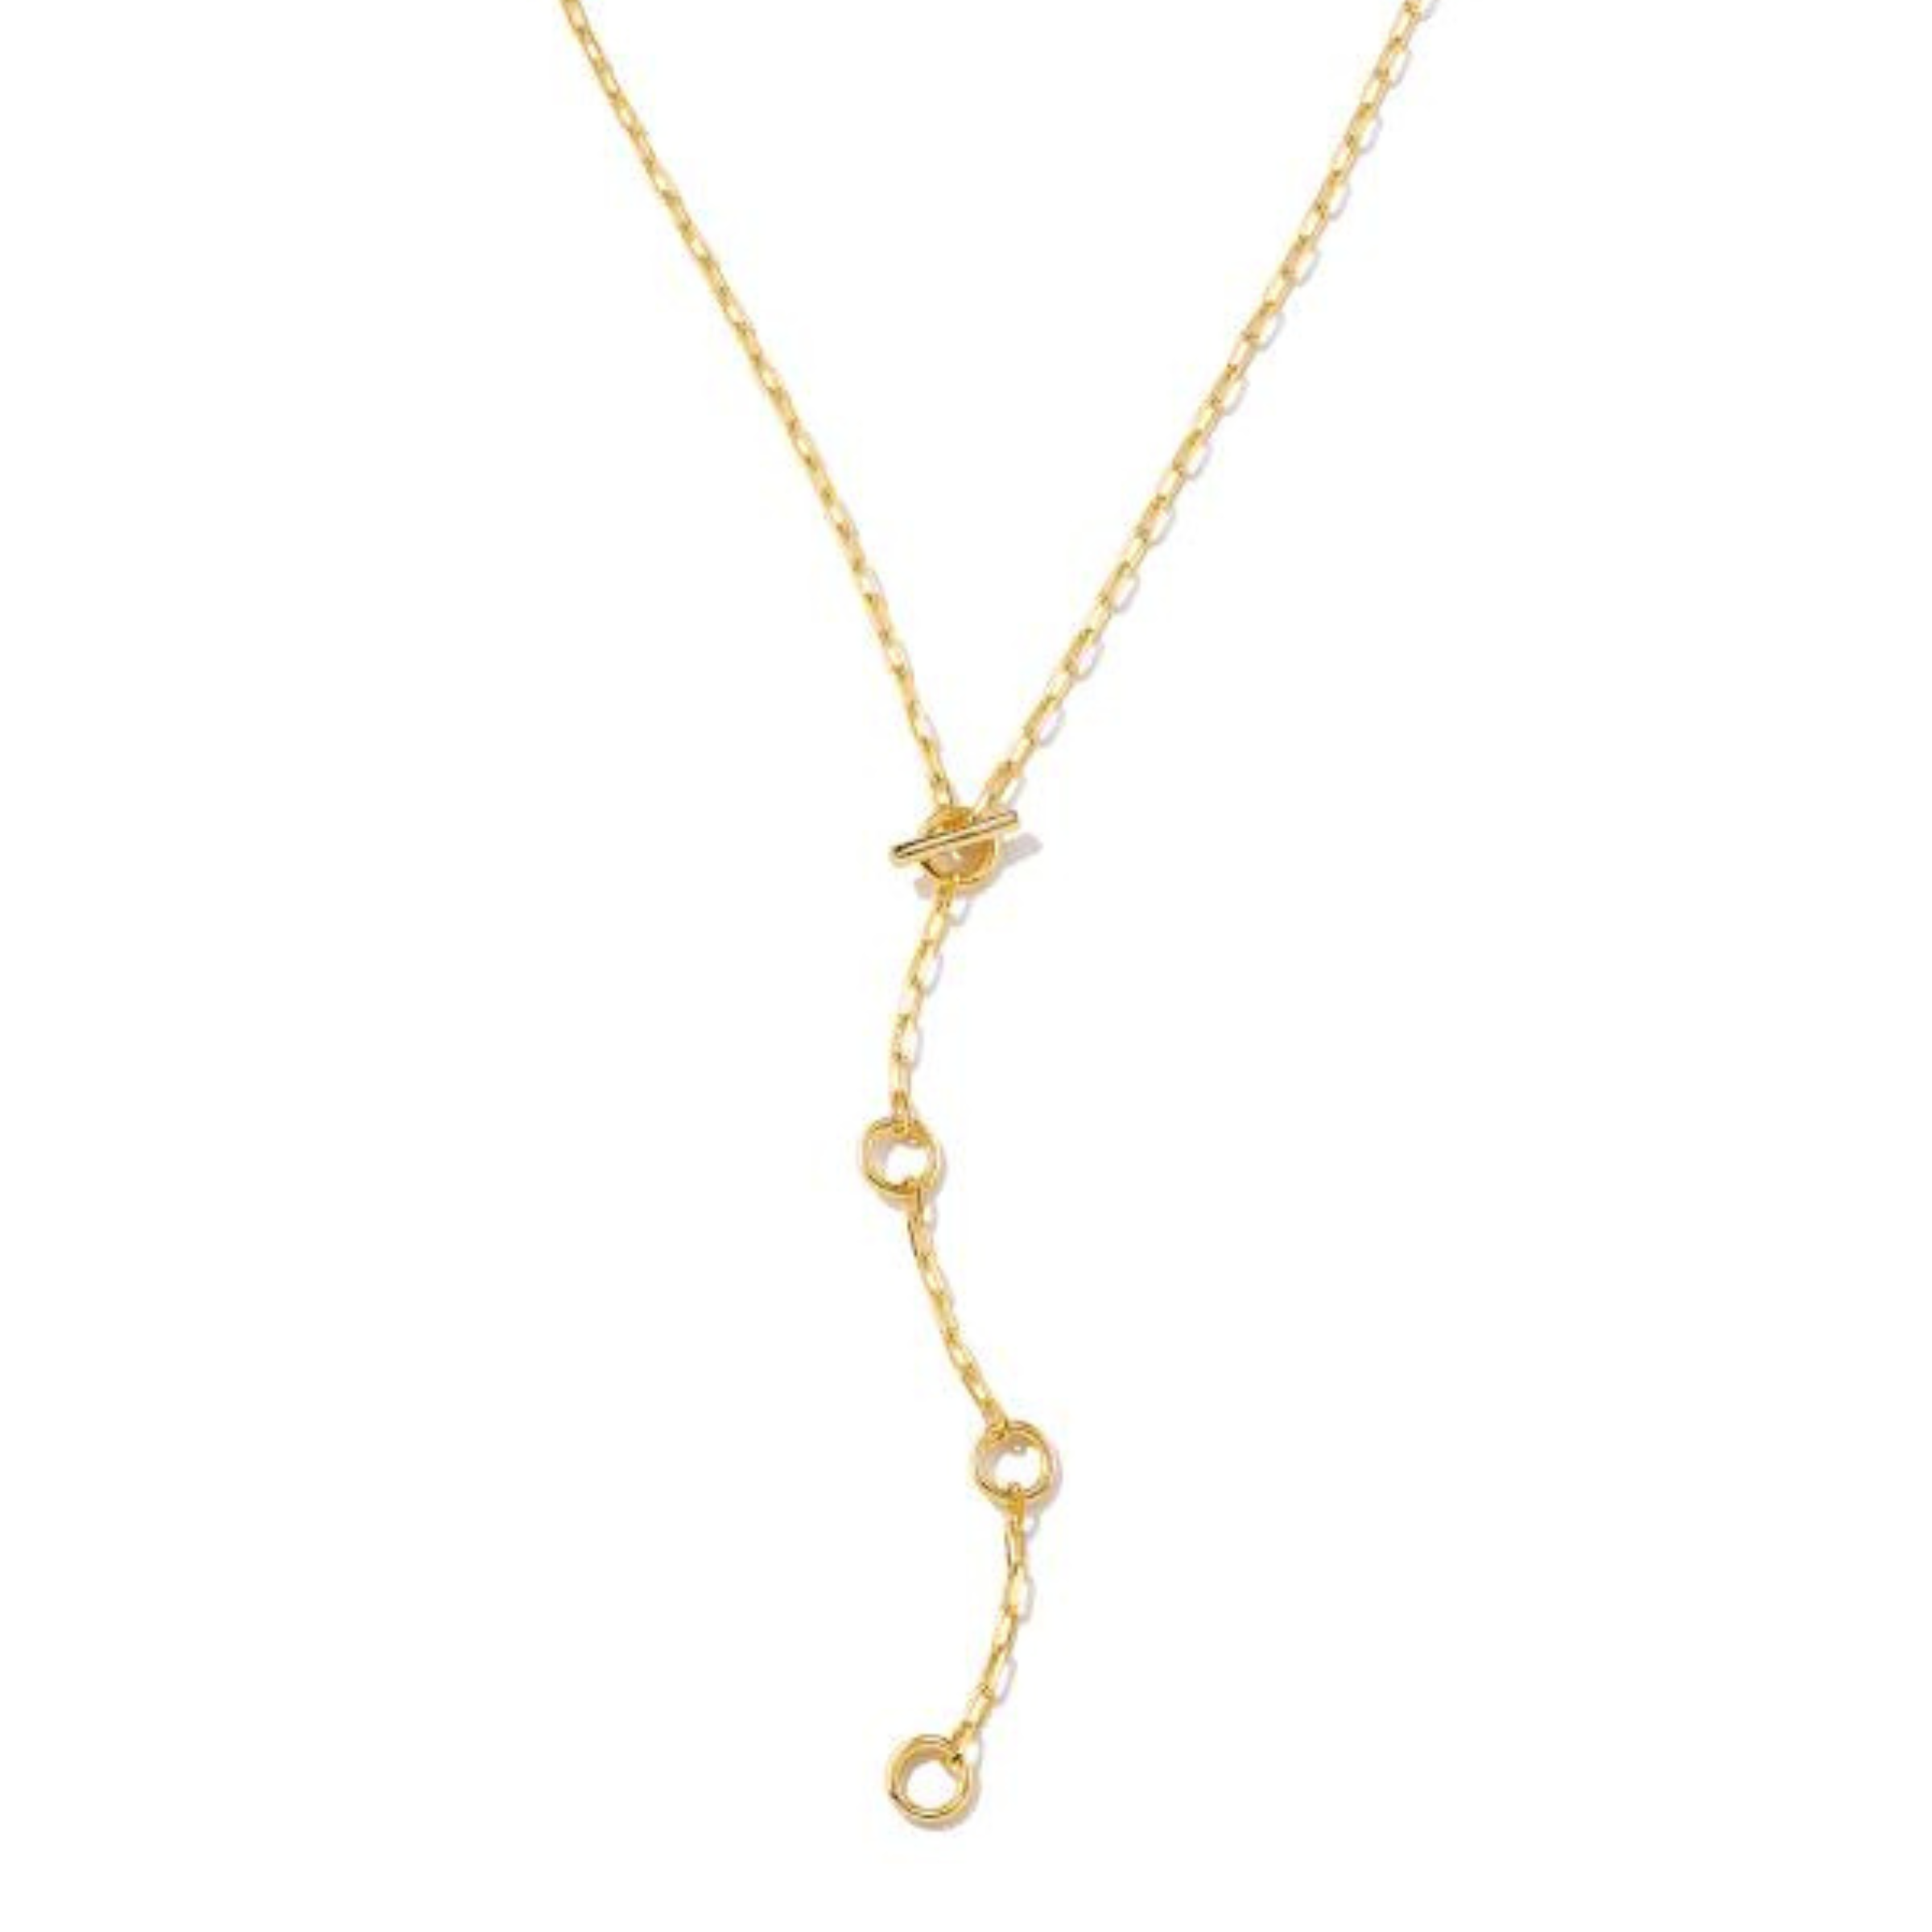 Kendra Scott | Andi Y Necklace in Gold - Giddy Up Glamour Boutique